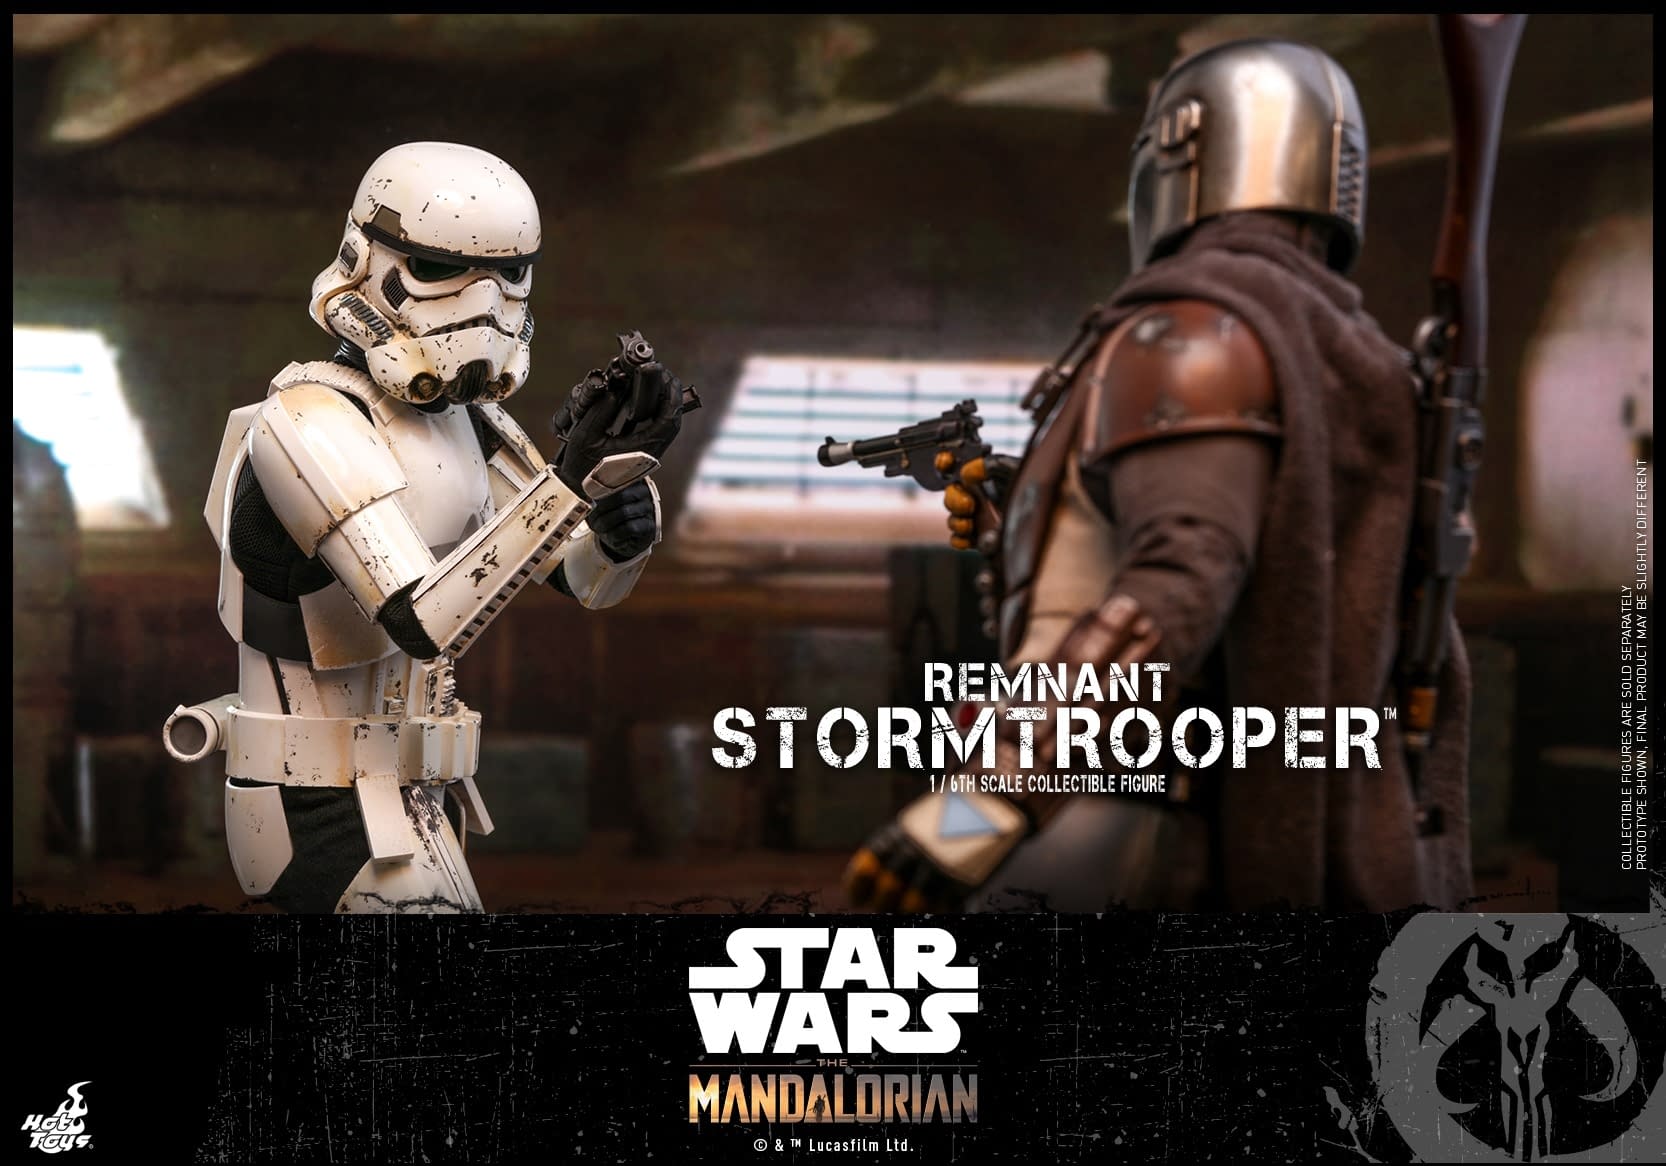 Stormtroopers Get a New Paint Job with New Hot Toys Figure